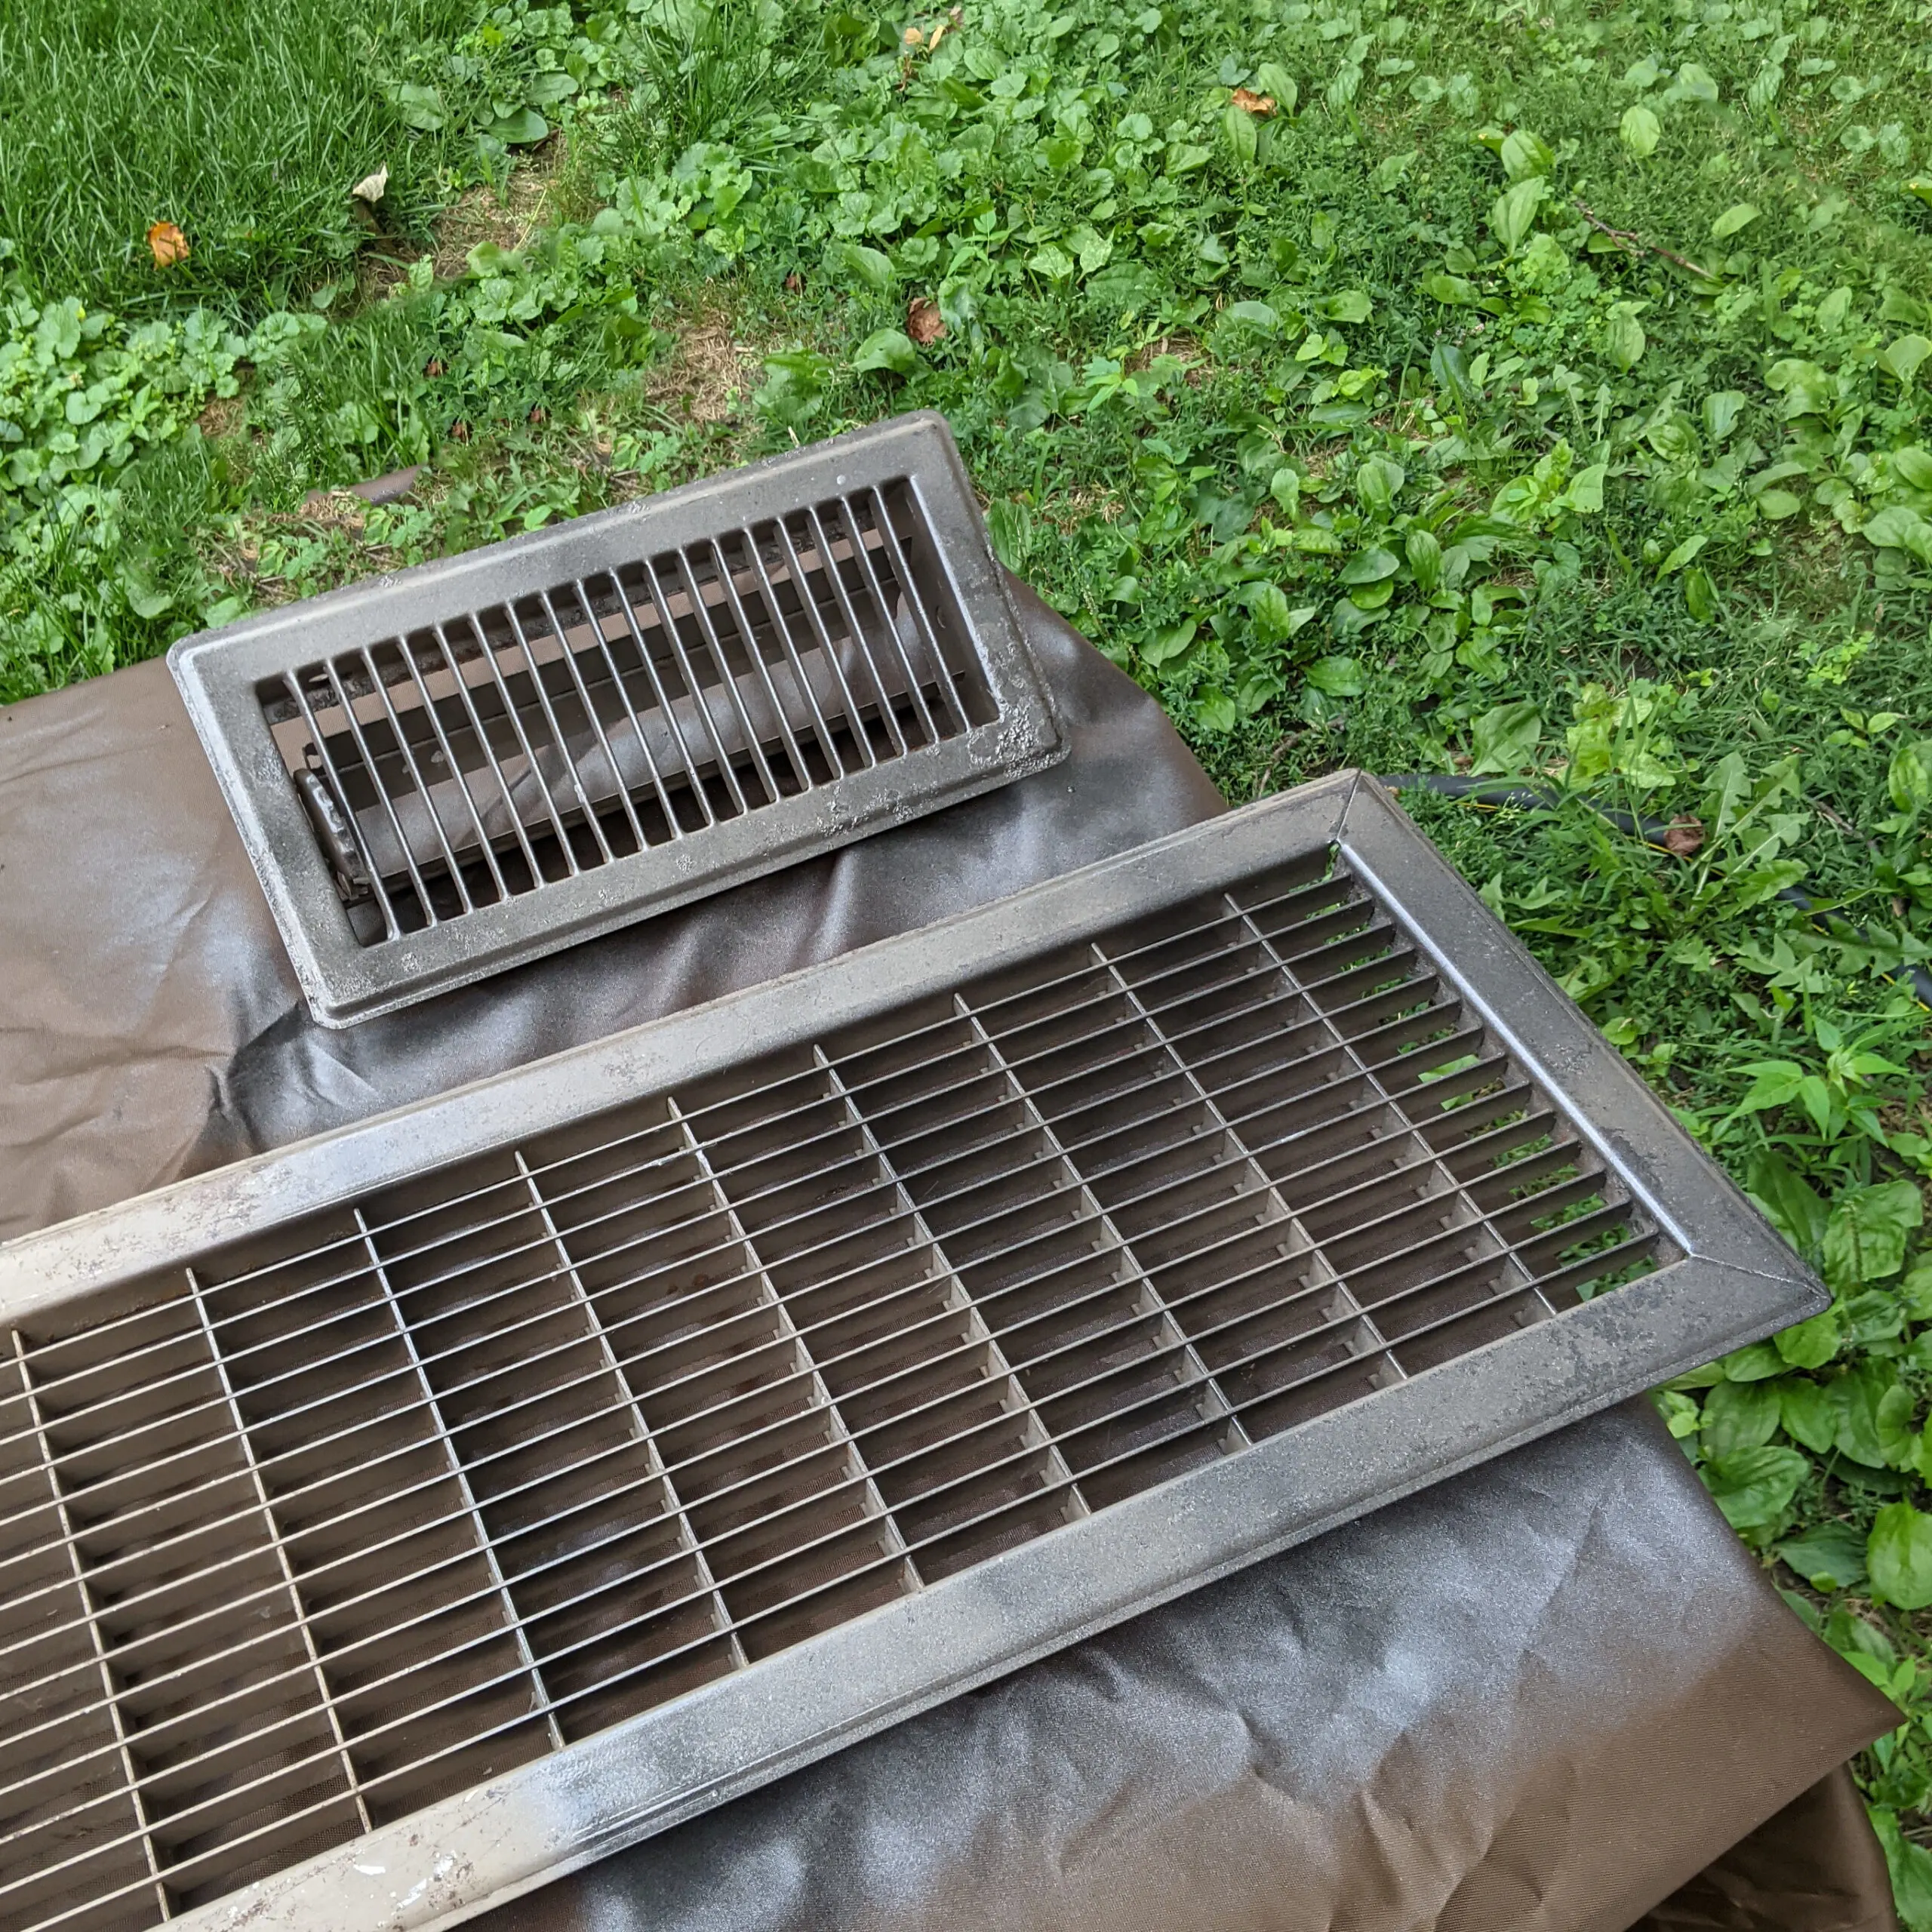 painting heat vent grills with light coats of metallic paint.